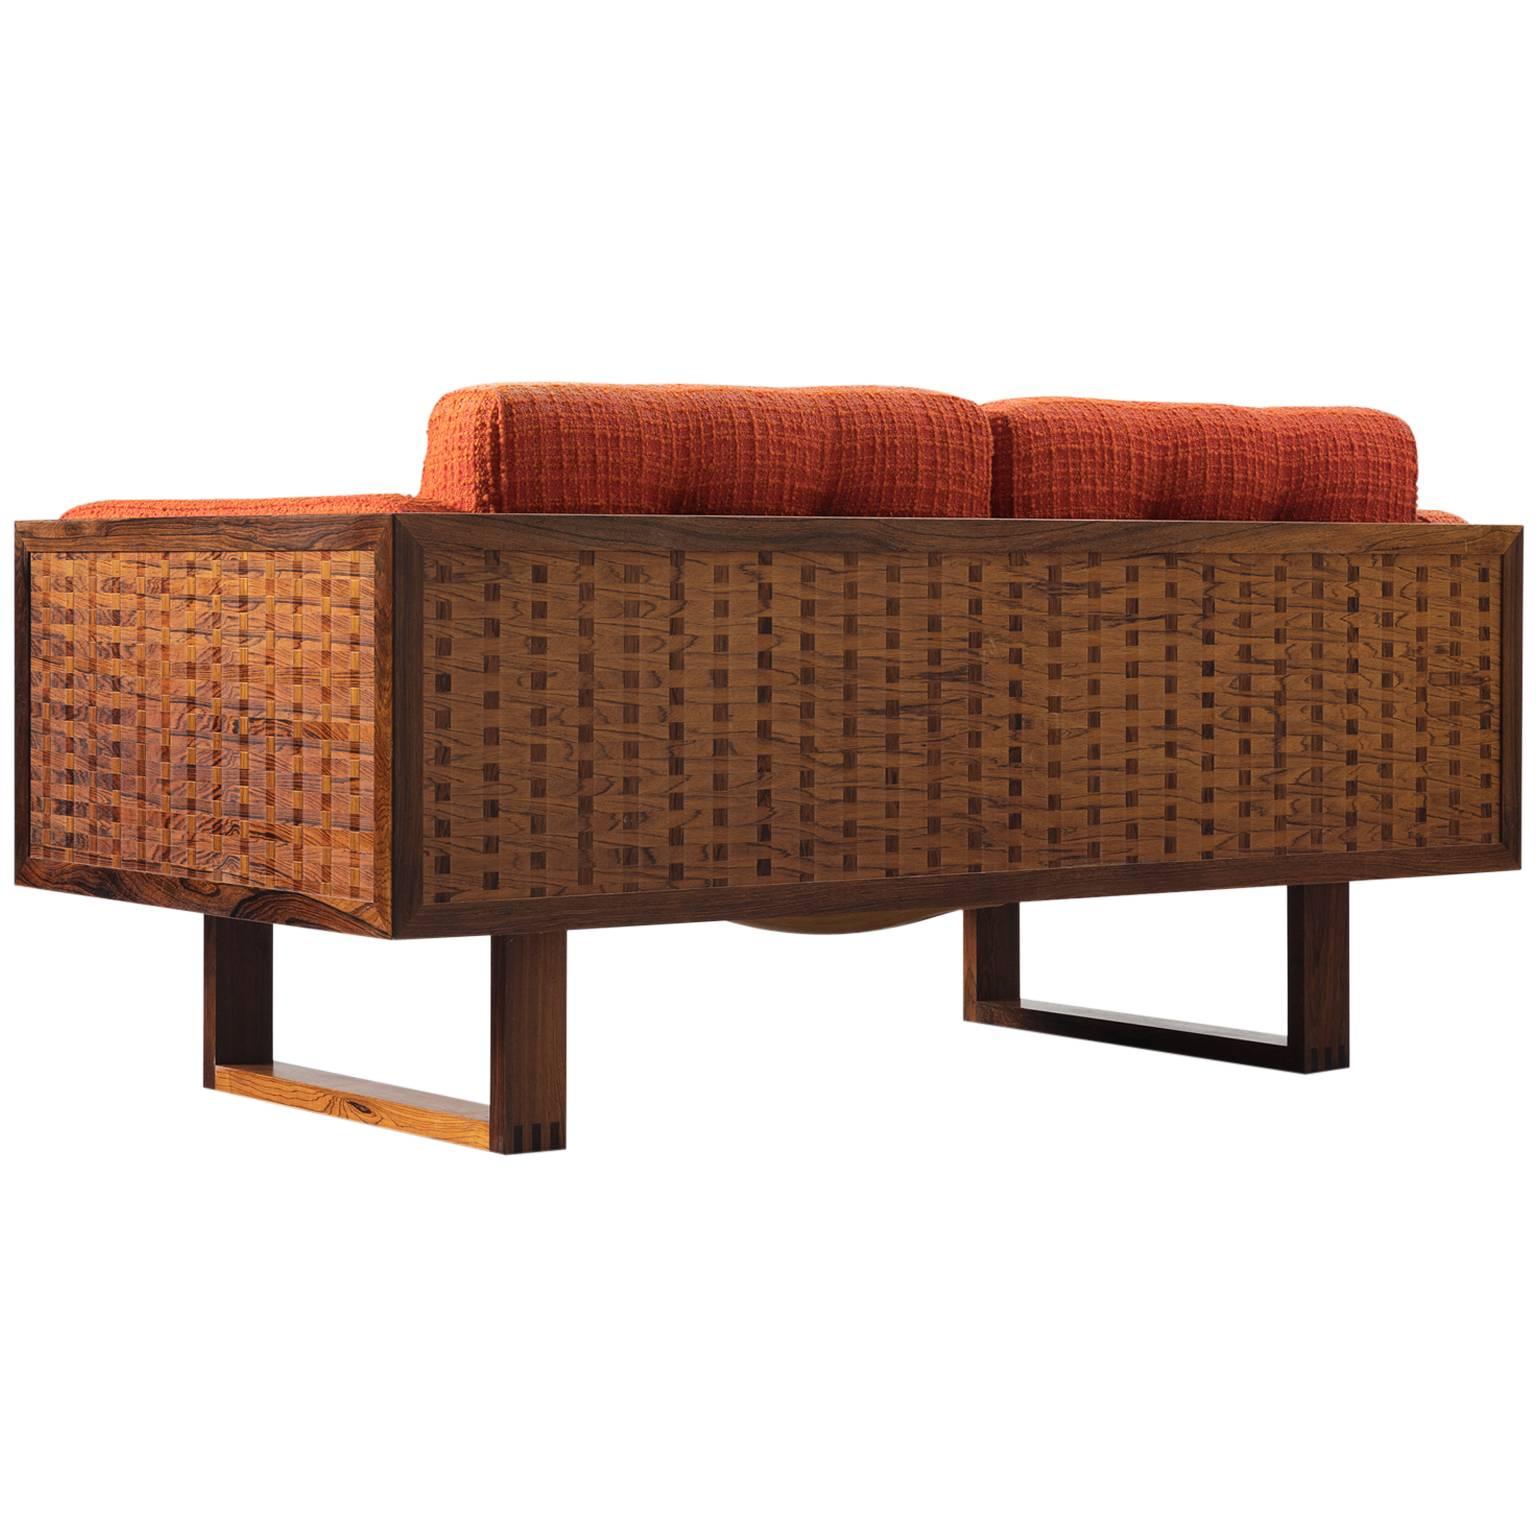 Poul Cadovius Small Rosewood Sofa in Orange Fabric Upholstery